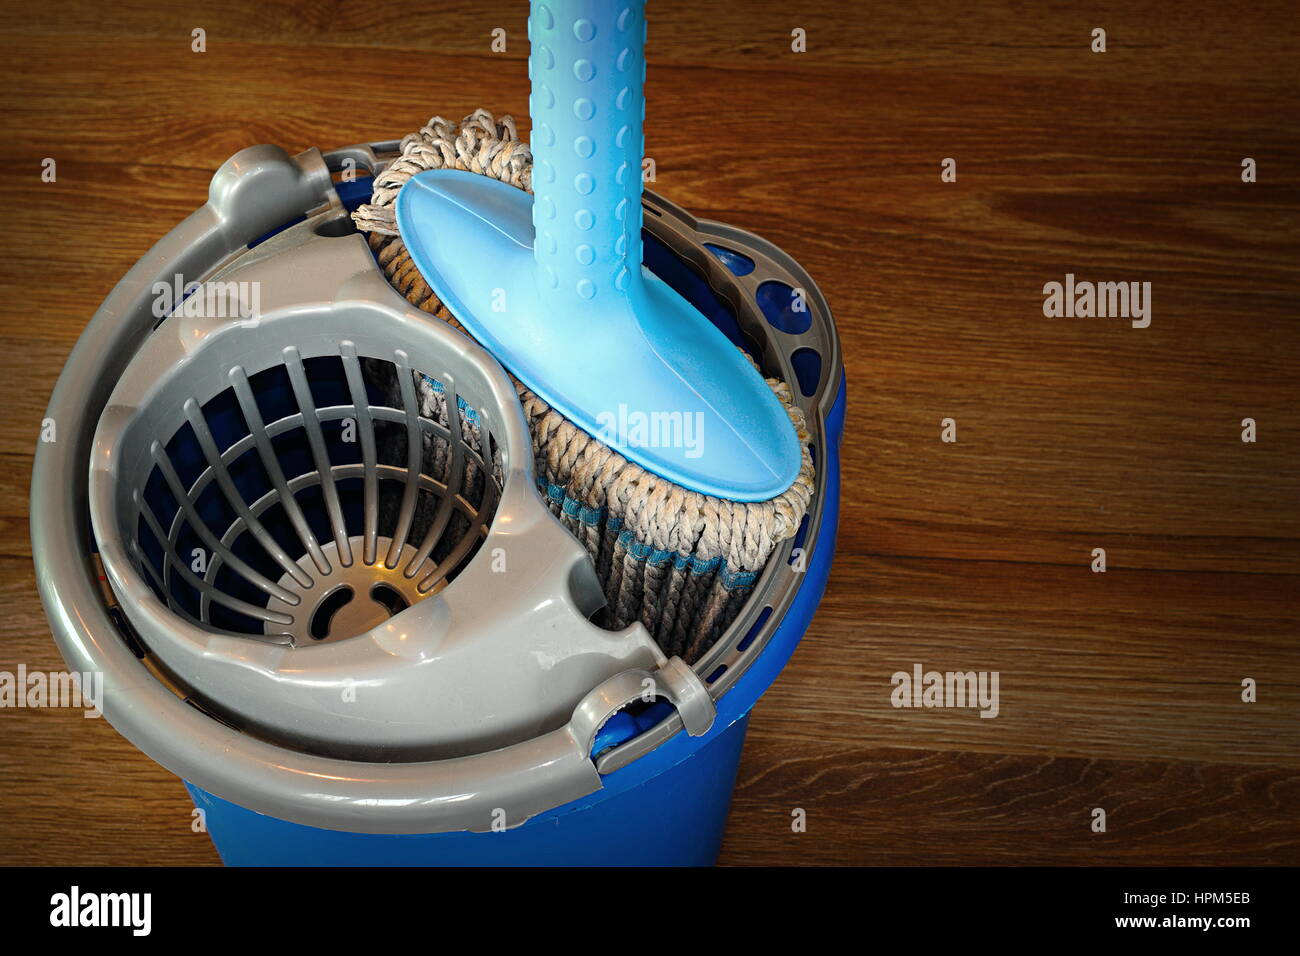 mop and blue bucket ready for cleaning wooden parquet floor Stock Photo